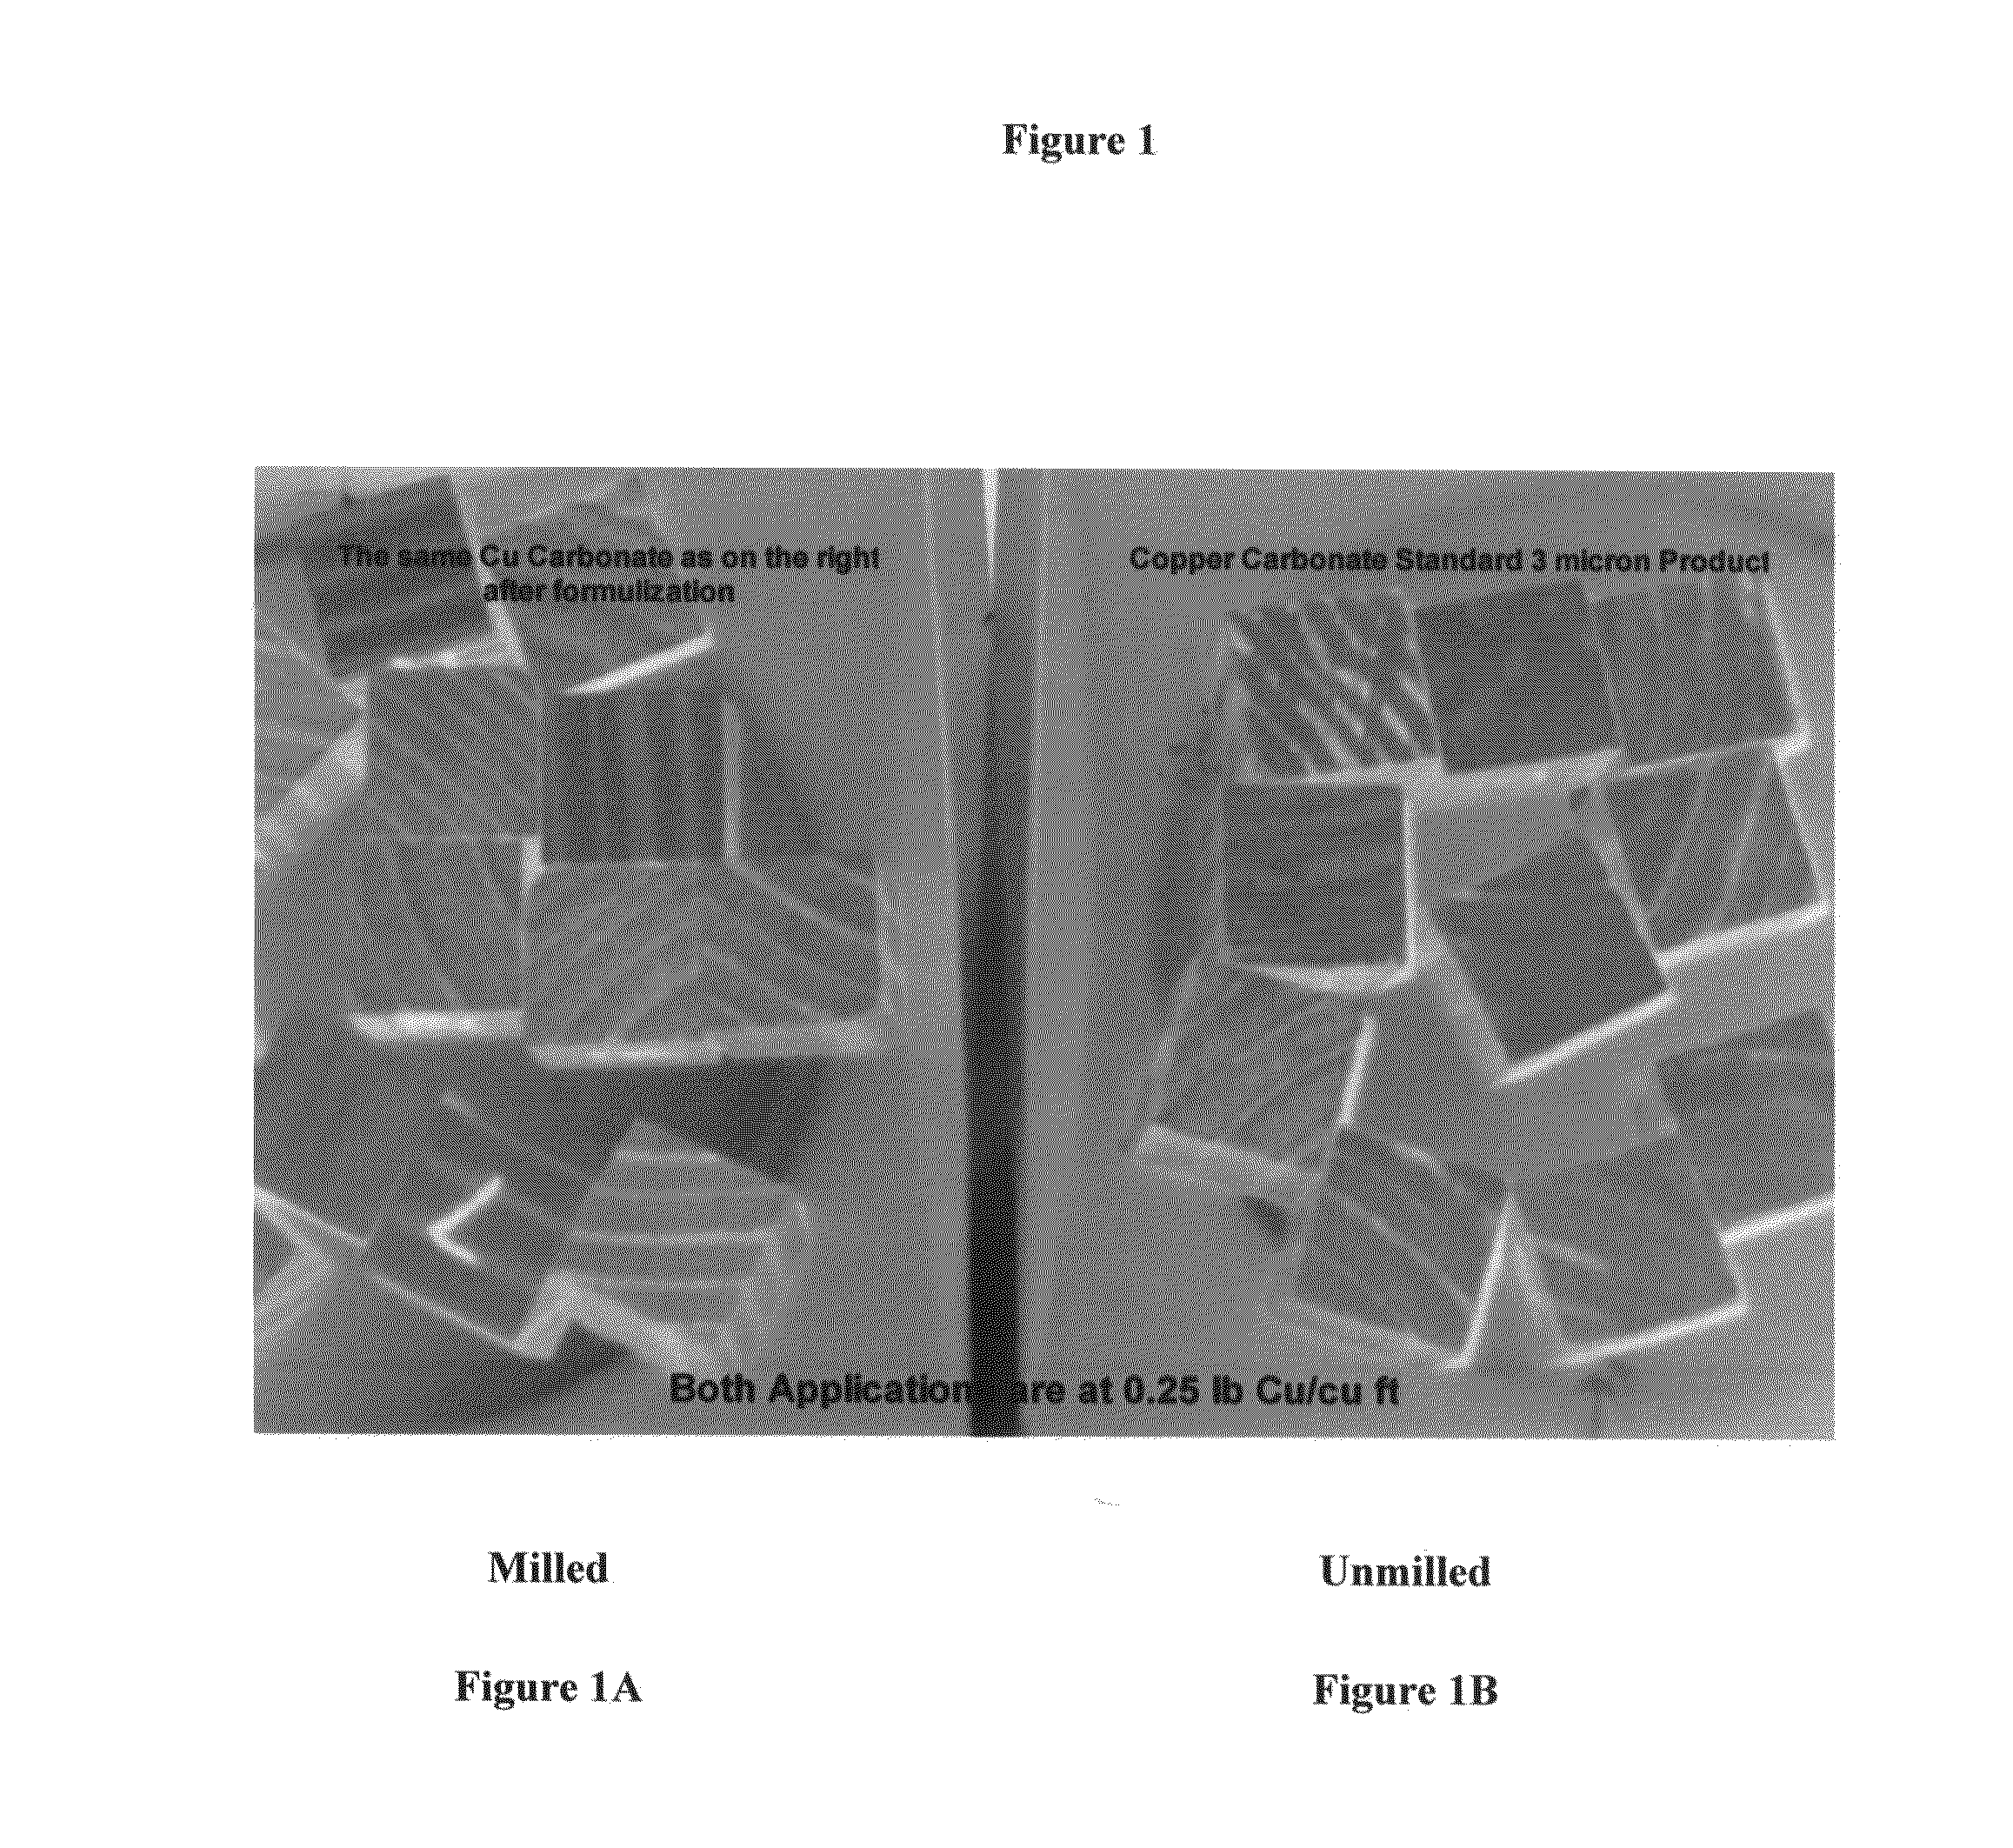 Particulate wood preservative and method for producing the same